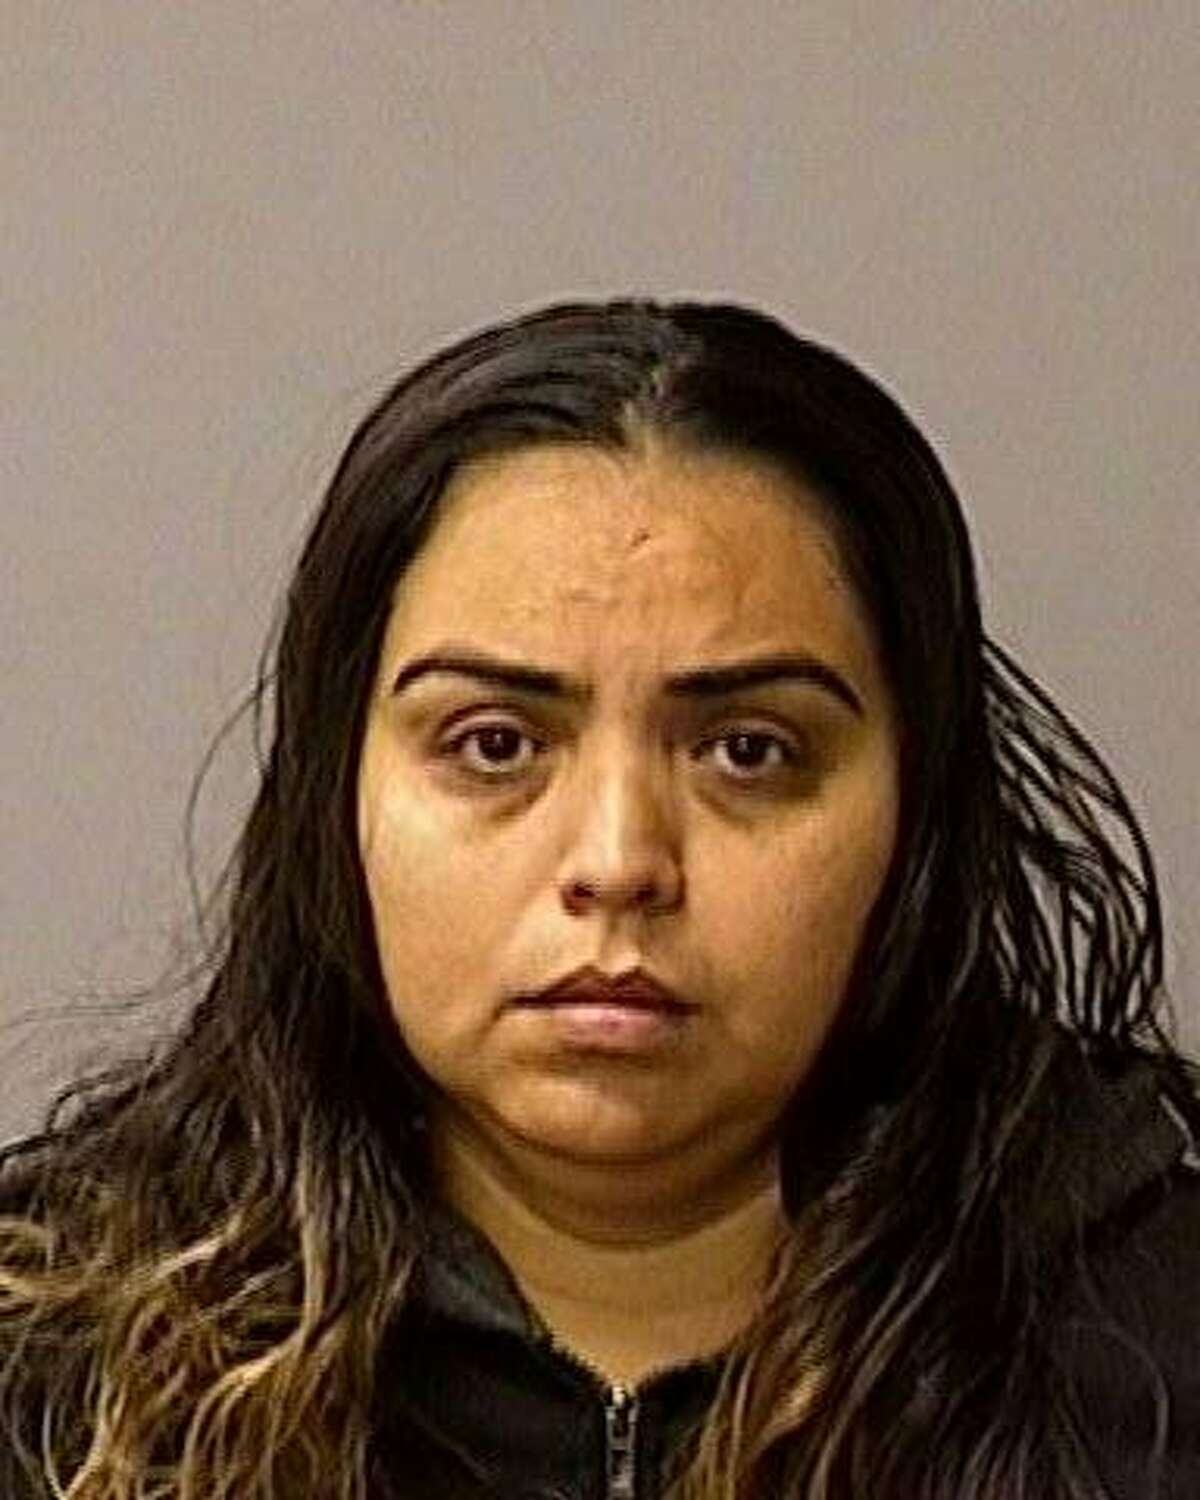 Ana Leyde Cervantes, 30, of Newman, was arrested in Turlock on suspicion of helping her romantic partner, Gustavo Perez Arriaga, evade law enforcement after allegedly shooting and killing Newman police Cpl. Ronil Singh, according to the Stanislaus County Sheriff's Department.